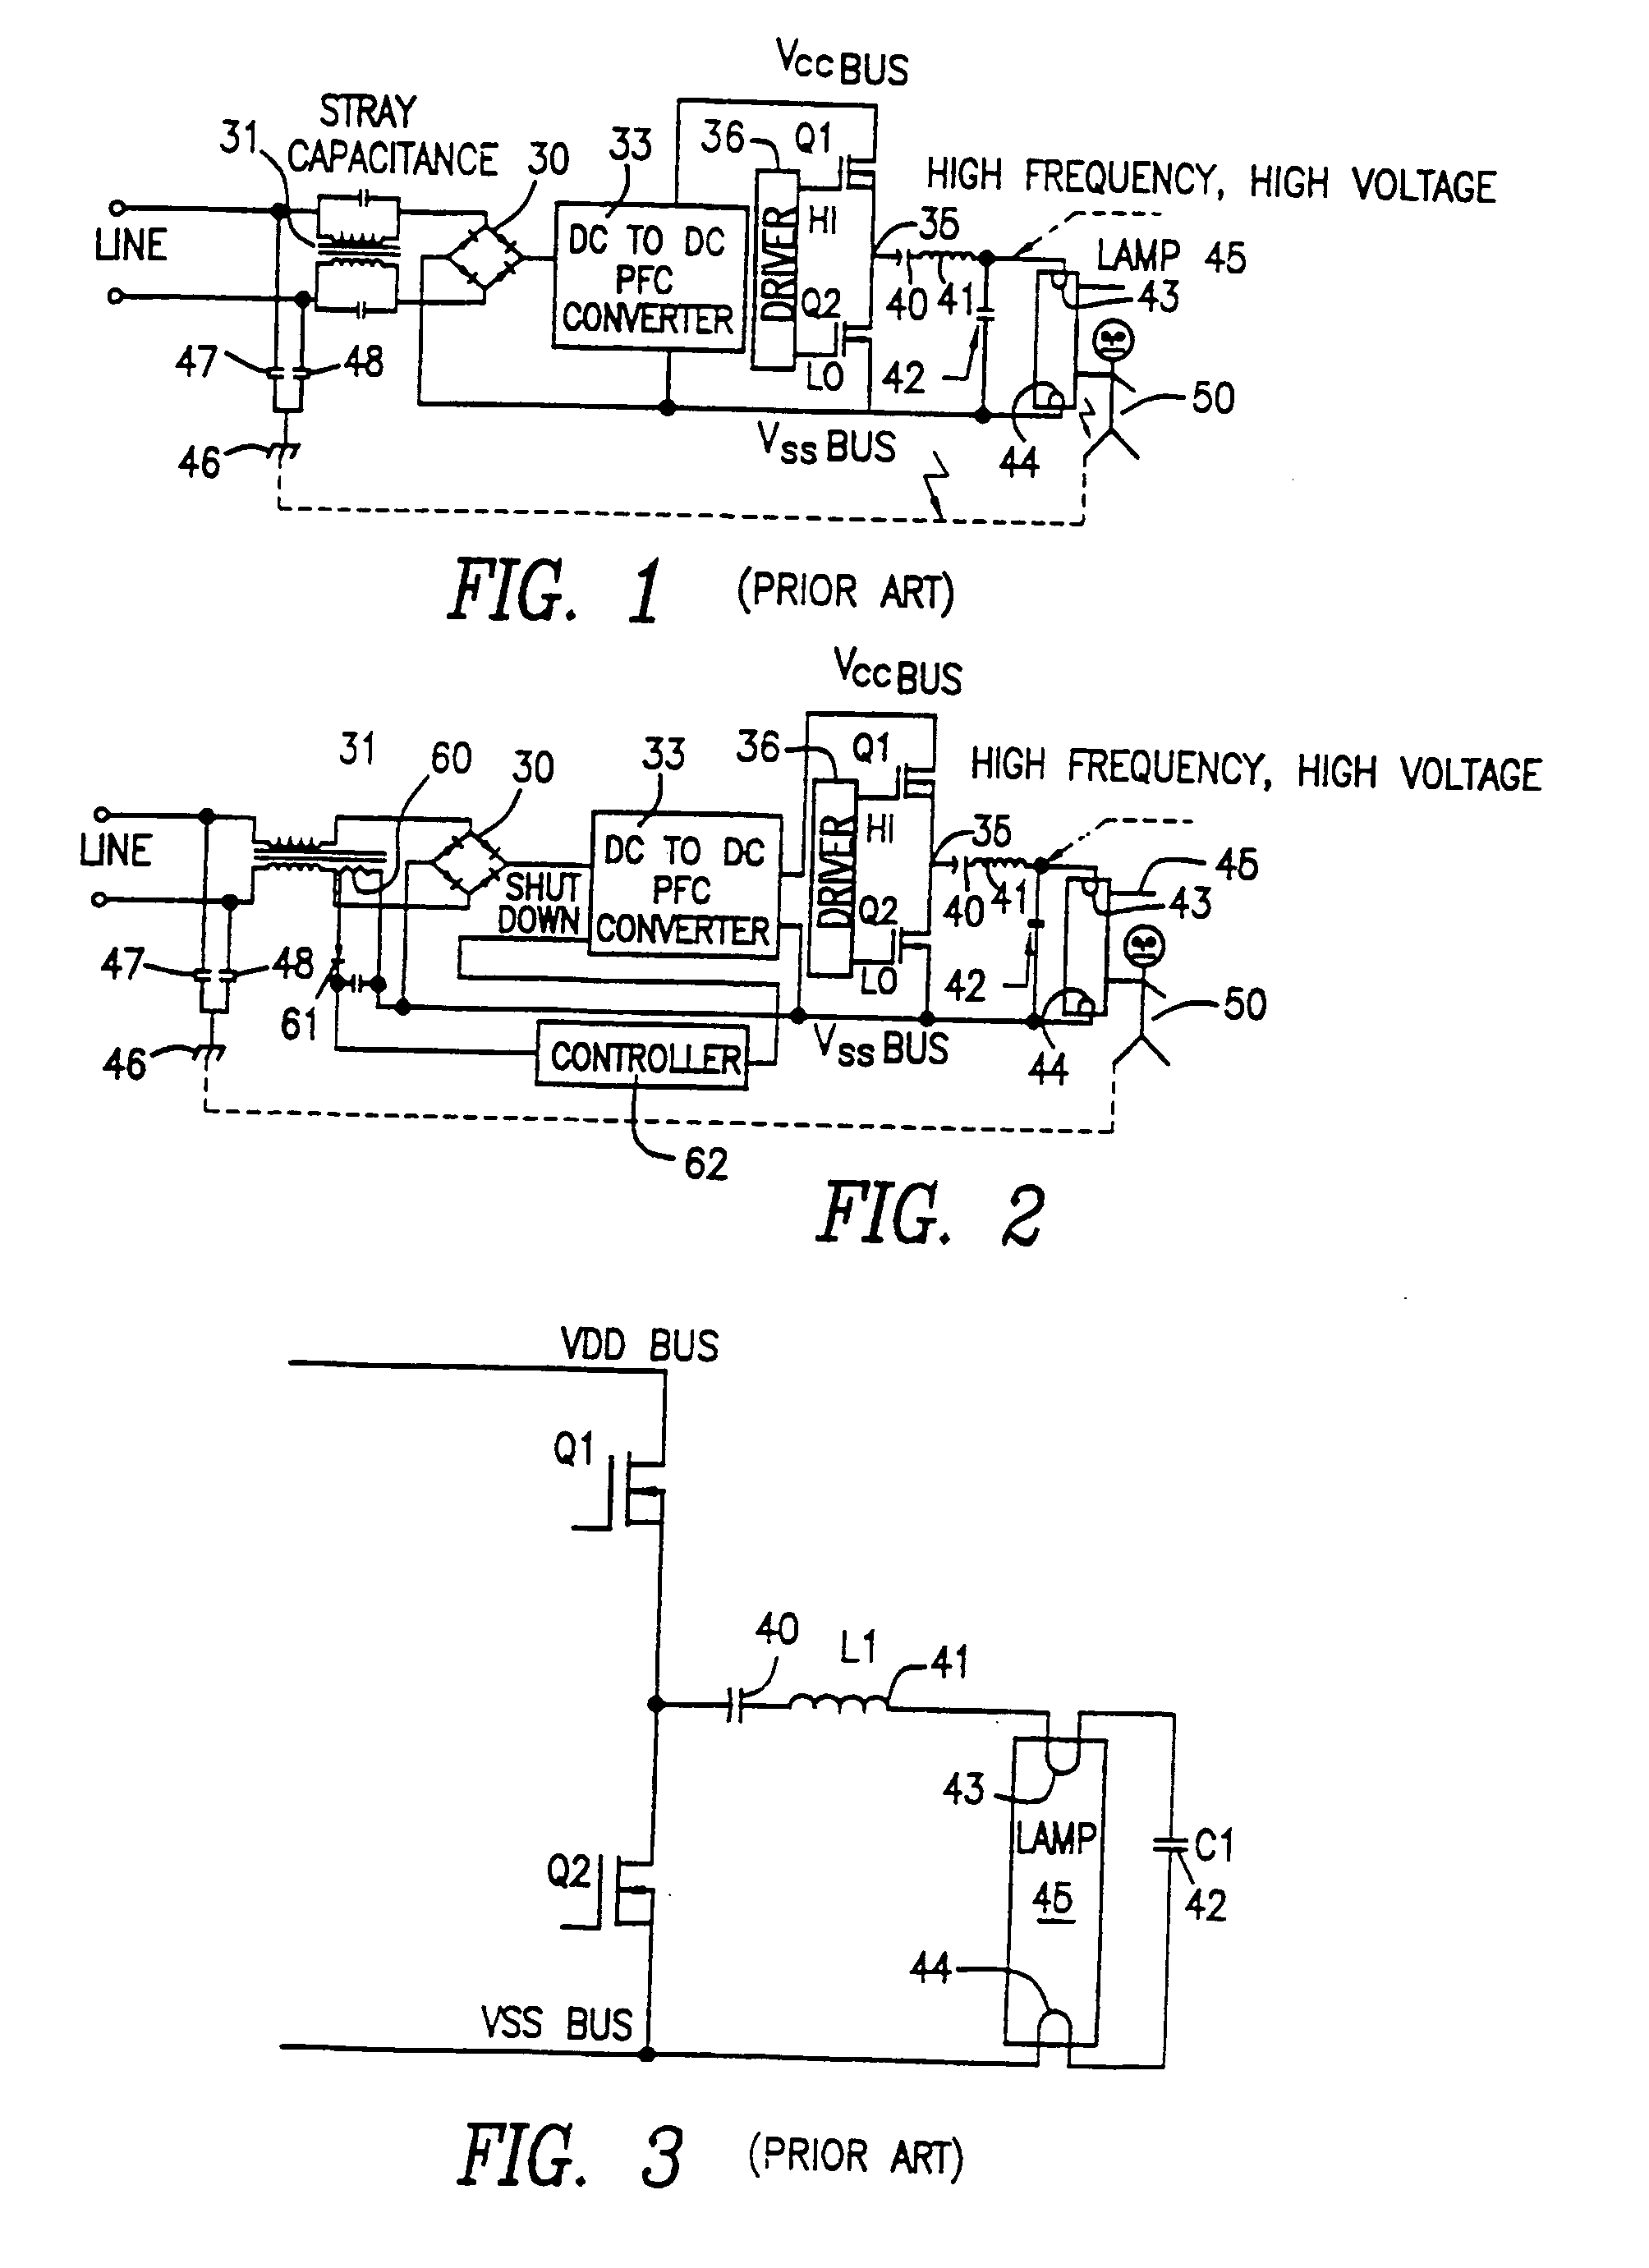 Digital power controller for gas discharge devices and the like